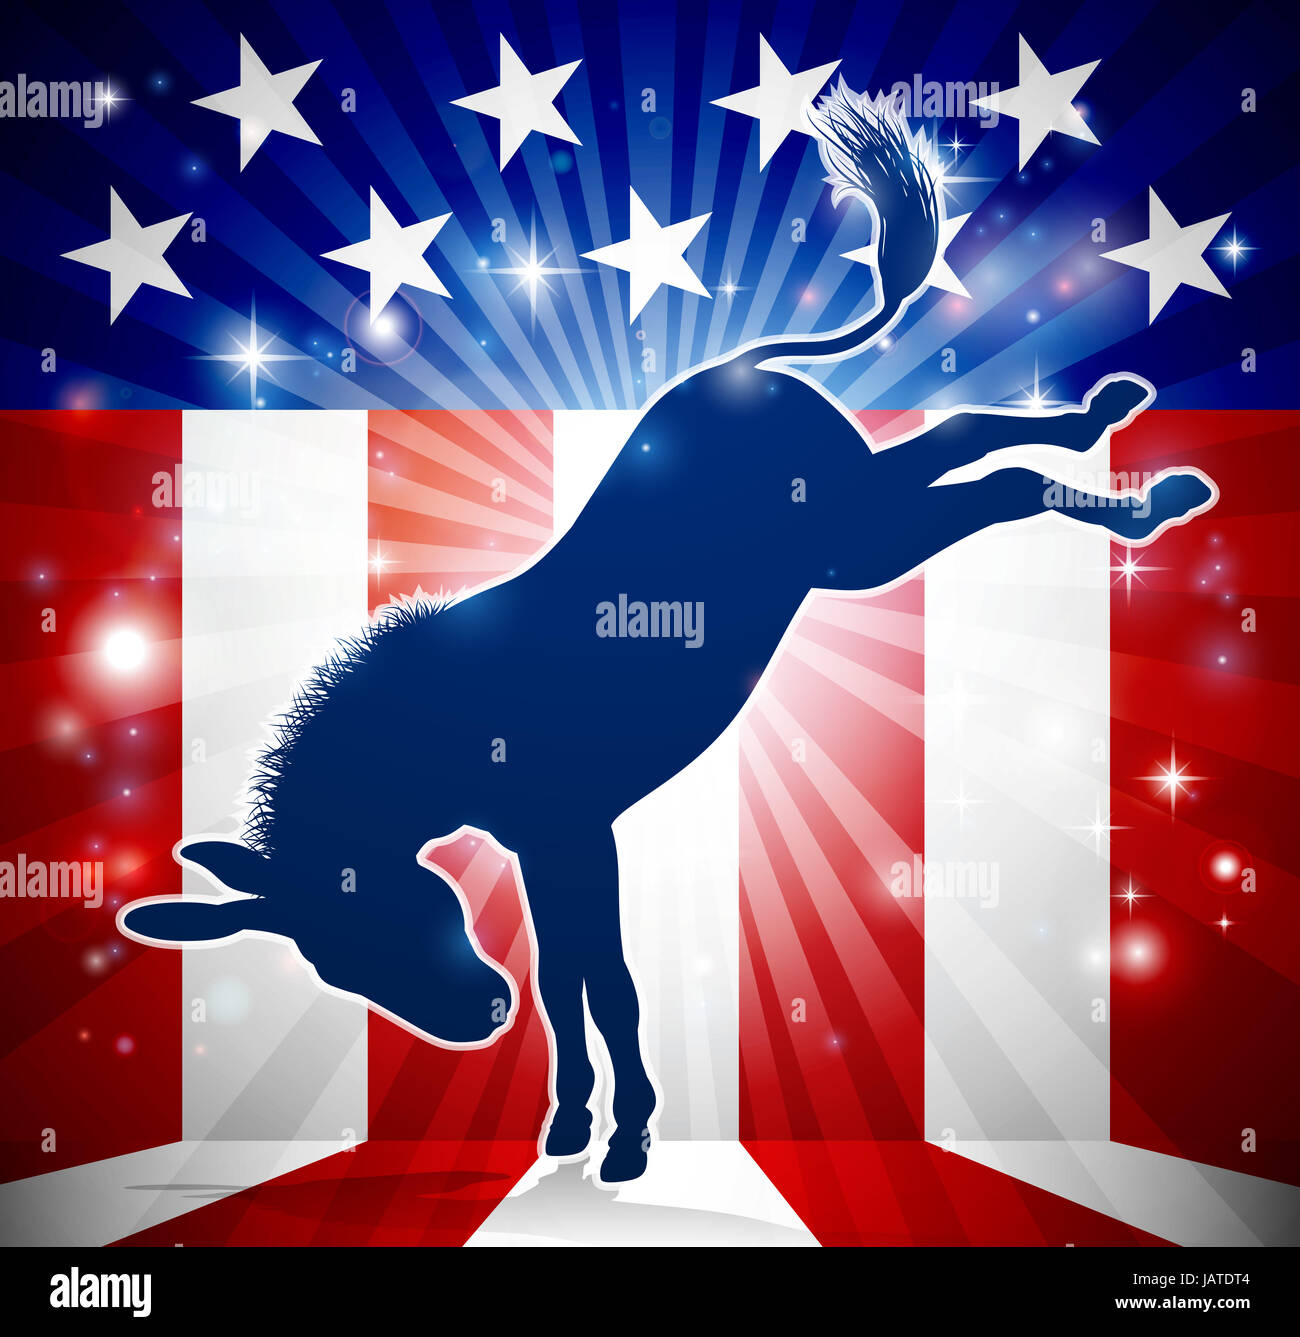 A donkey in silhouette kicking with an American flag in the background democrat political mascot Stock Photo